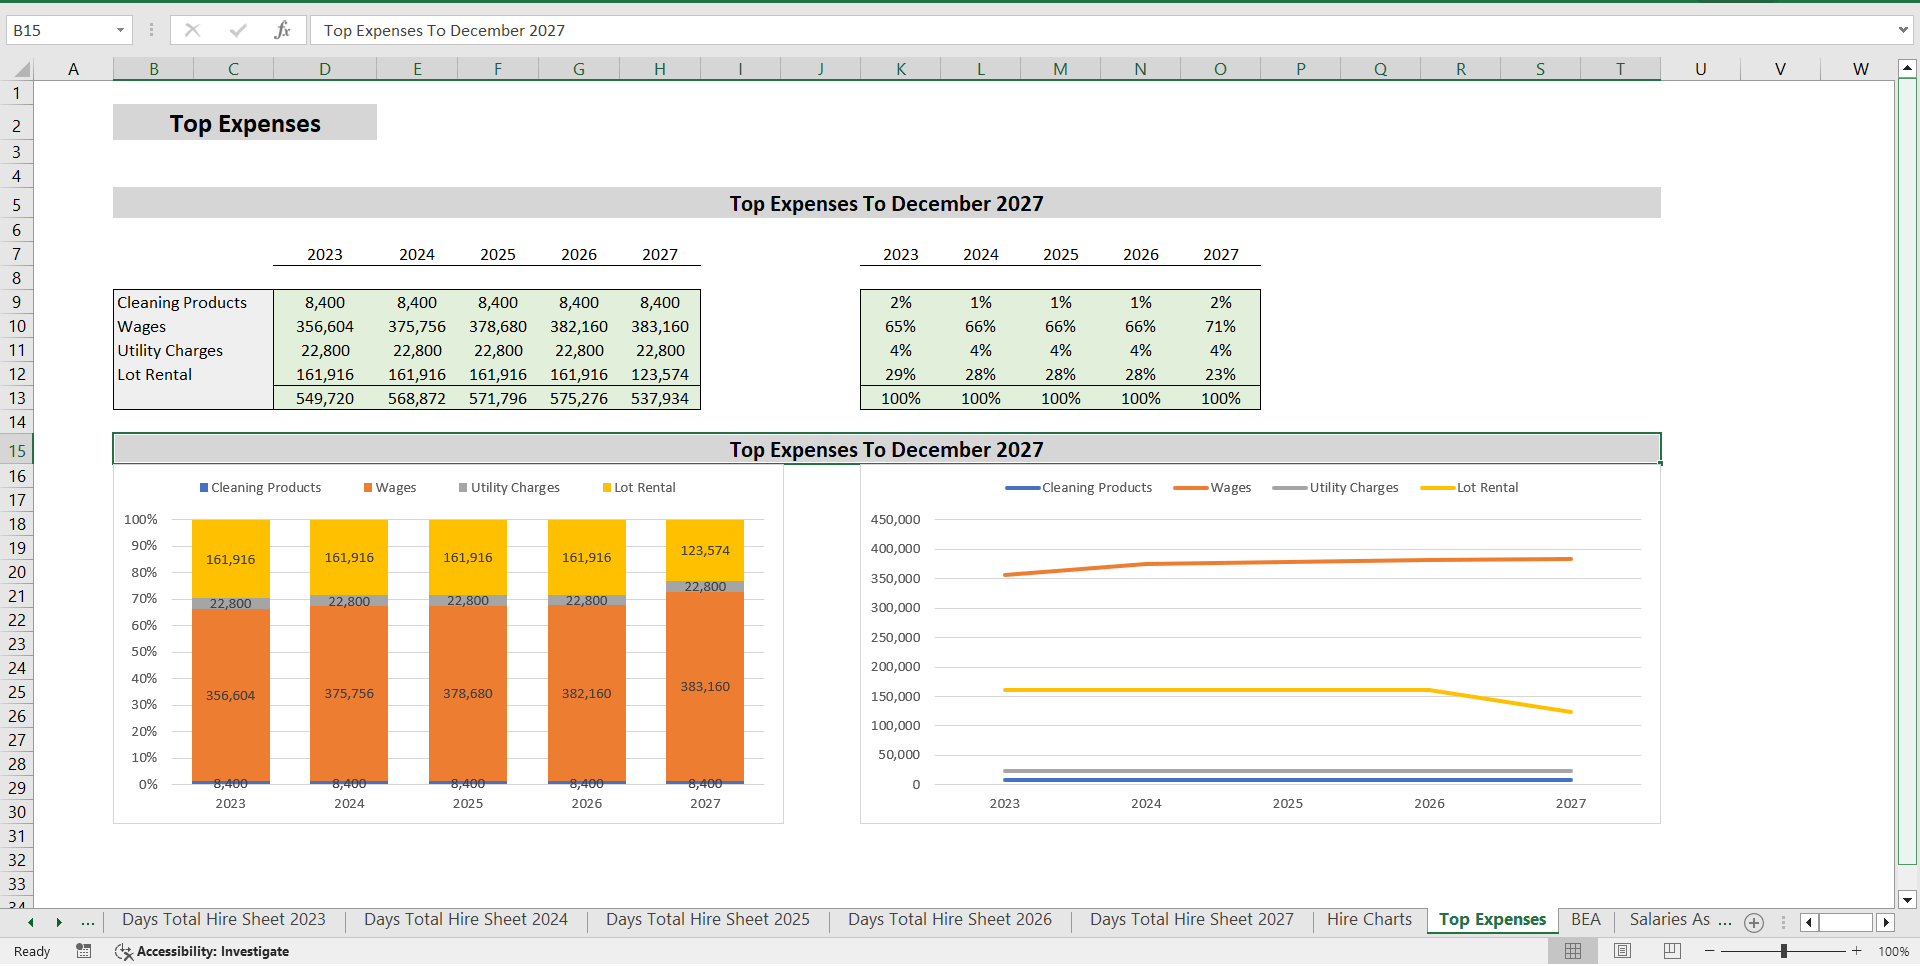 3 Statement Self Storage Company Finance Model (Excel template (XLSX)) Preview Image